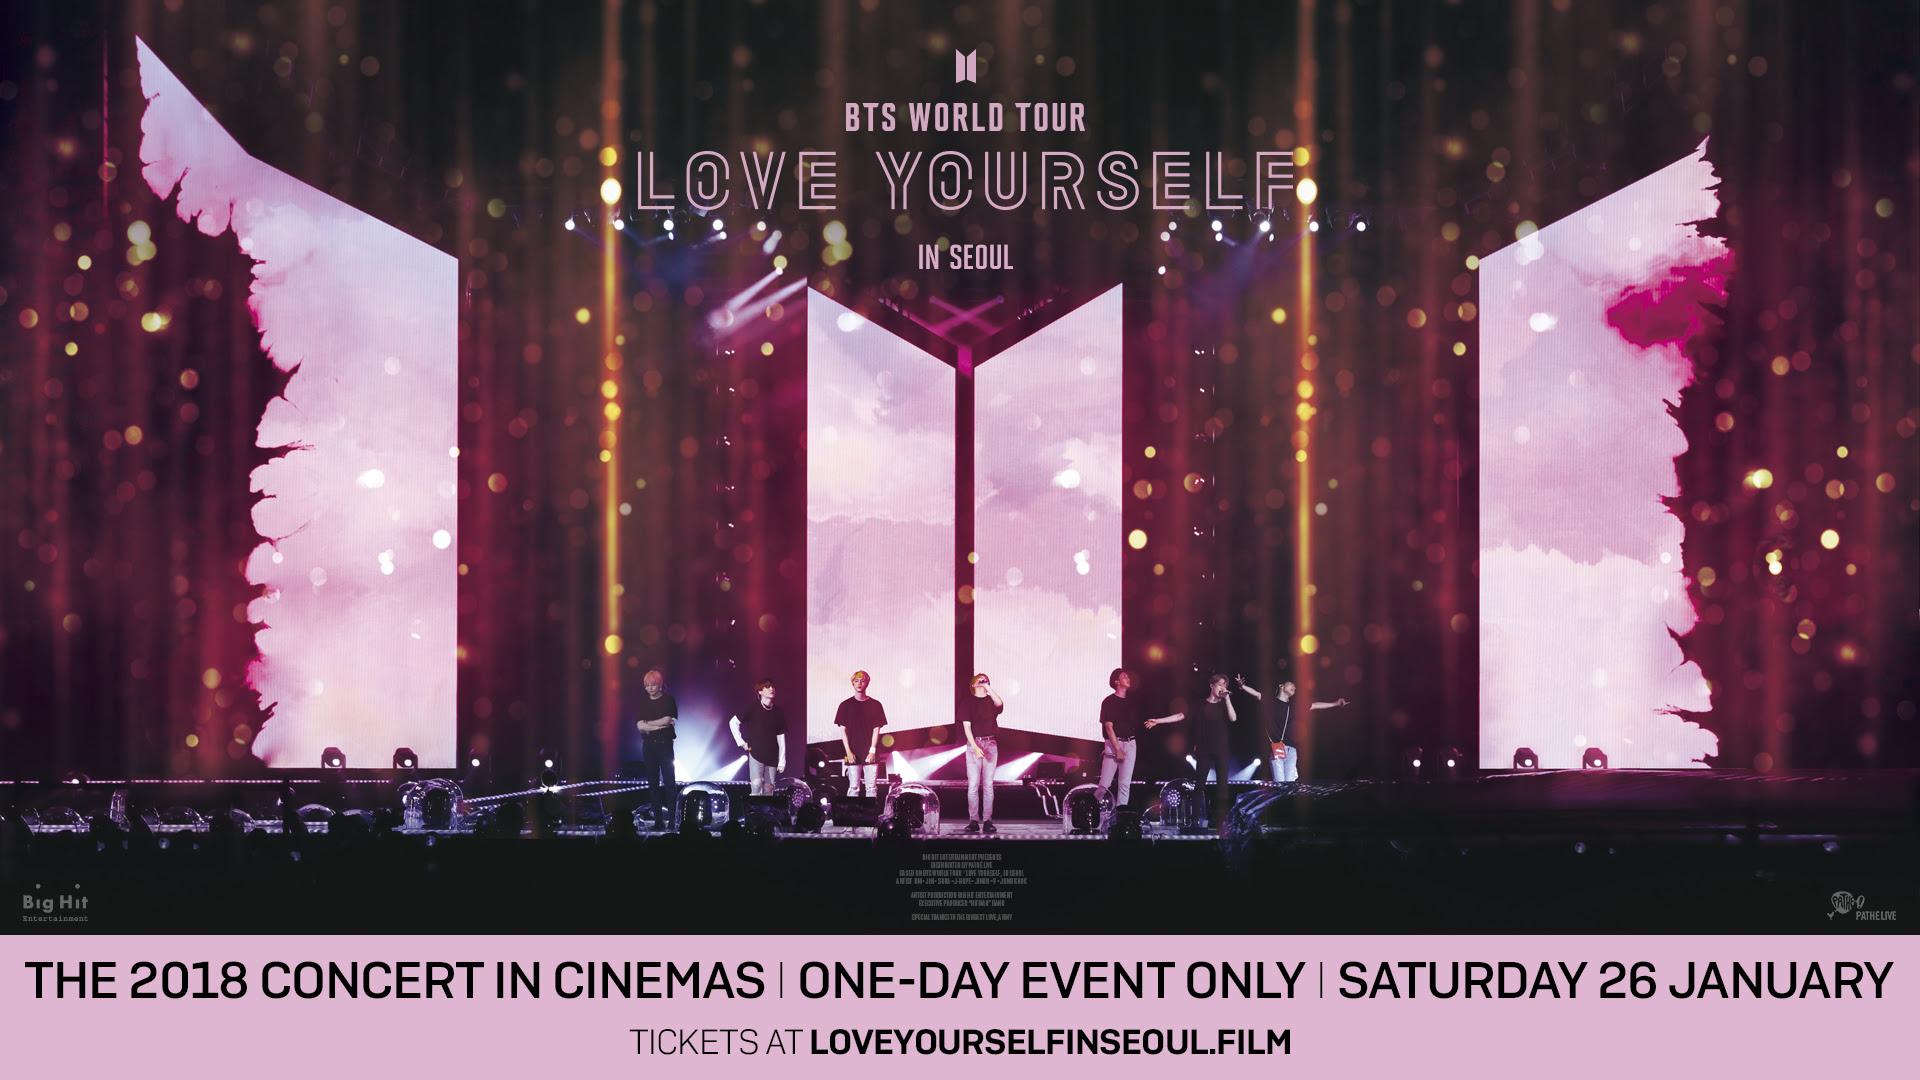 Tickets are Now Available for 'BTS WORLD TOUR LOVE YOURSELF